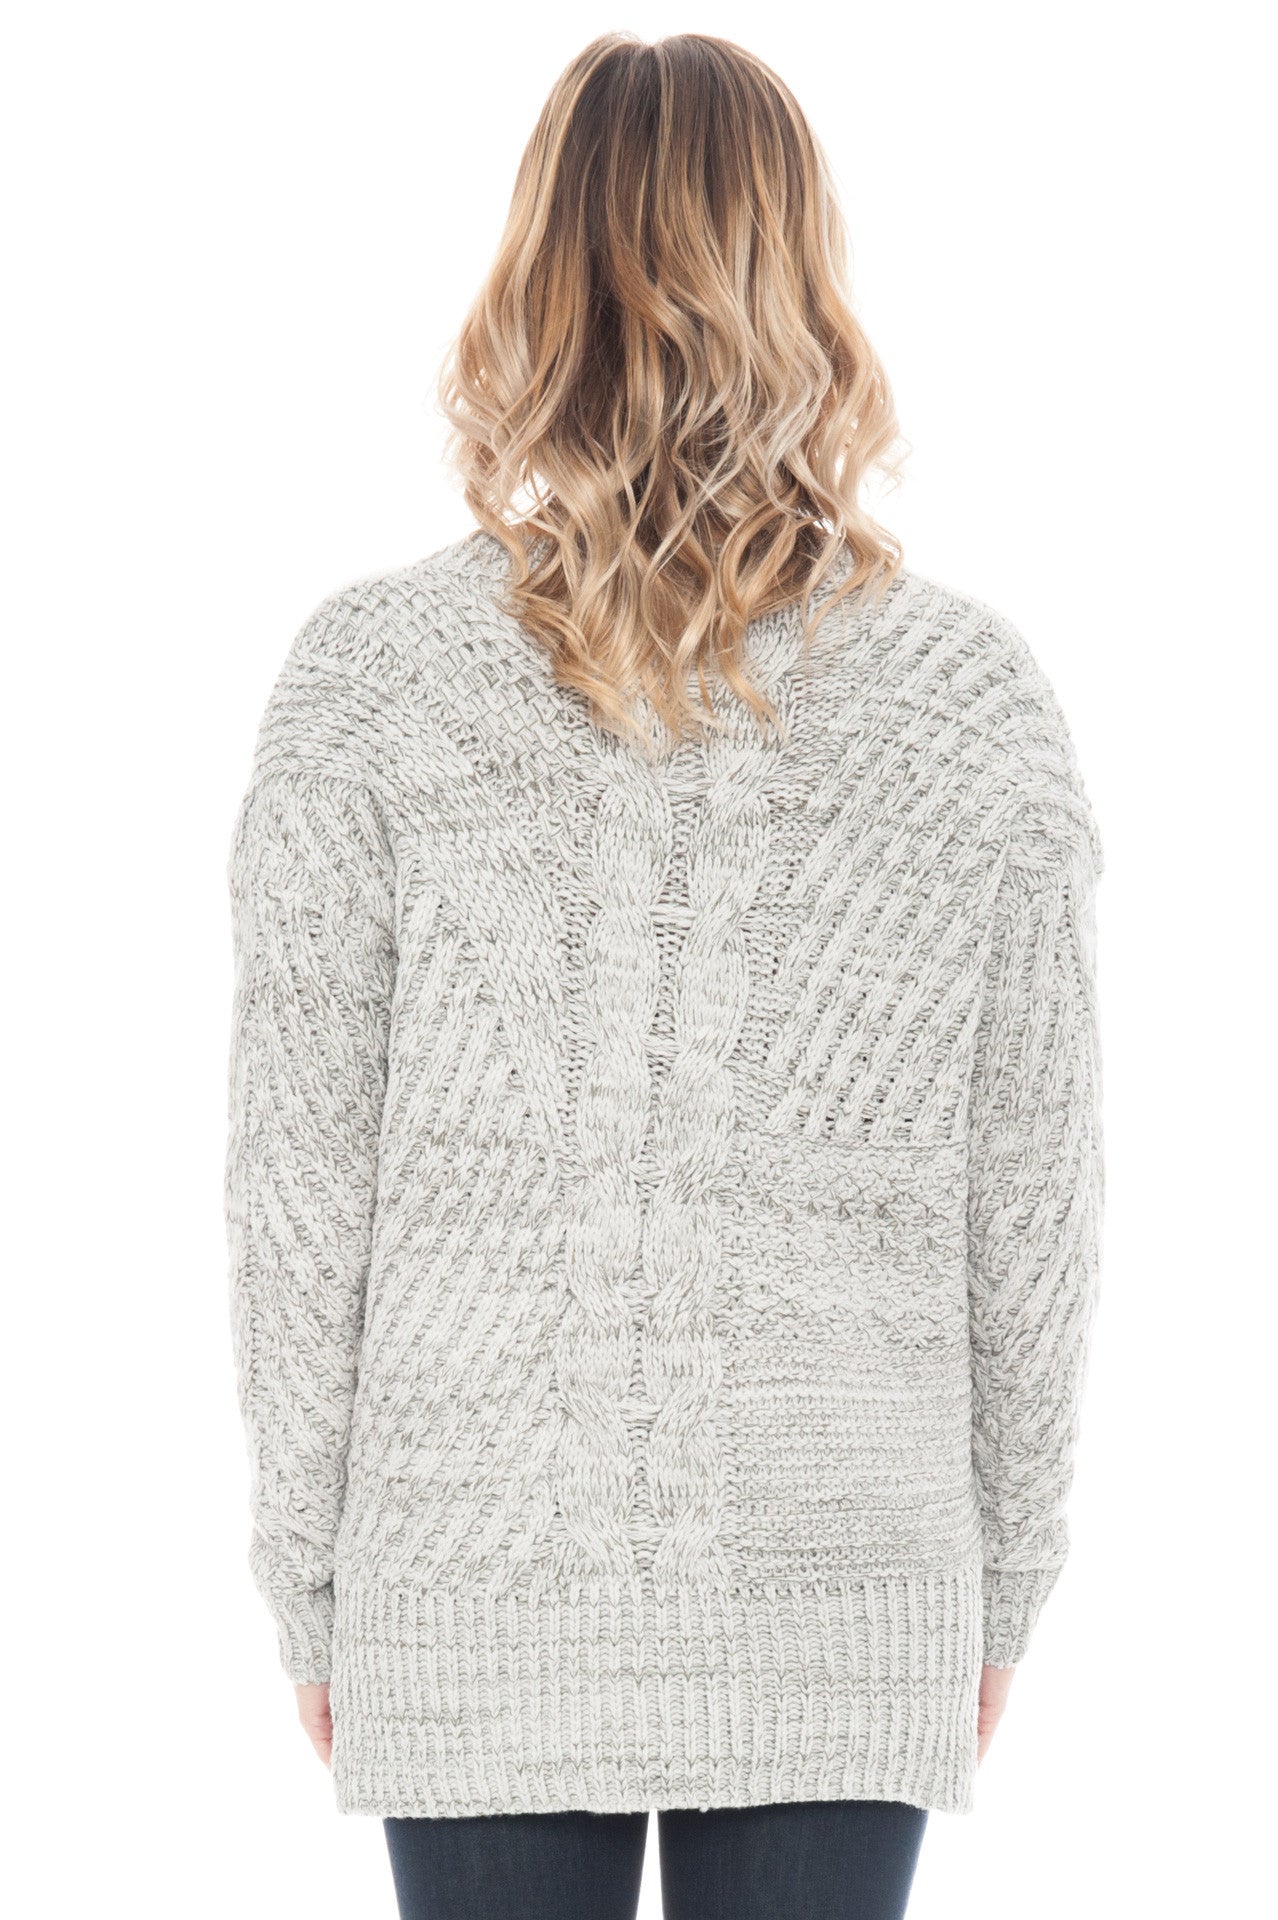 Sweater - Knit Lace Up By Paper Crane